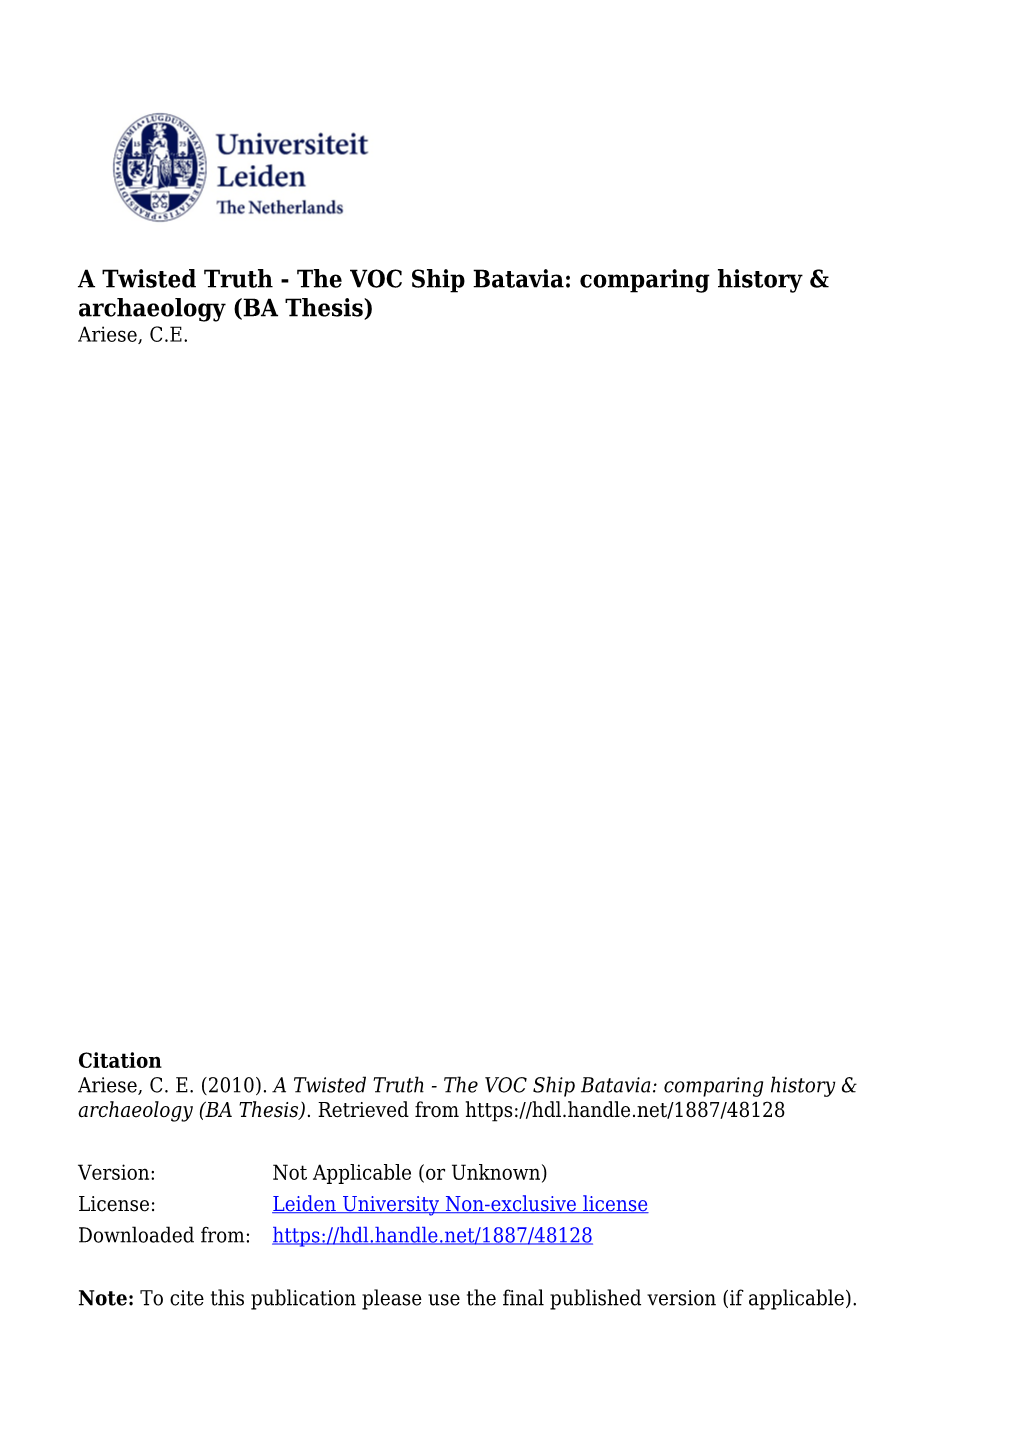 A Twisted Truth - the VOC Ship Batavia: Comparing History & Archaeology (BA Thesis) Ariese, C.E